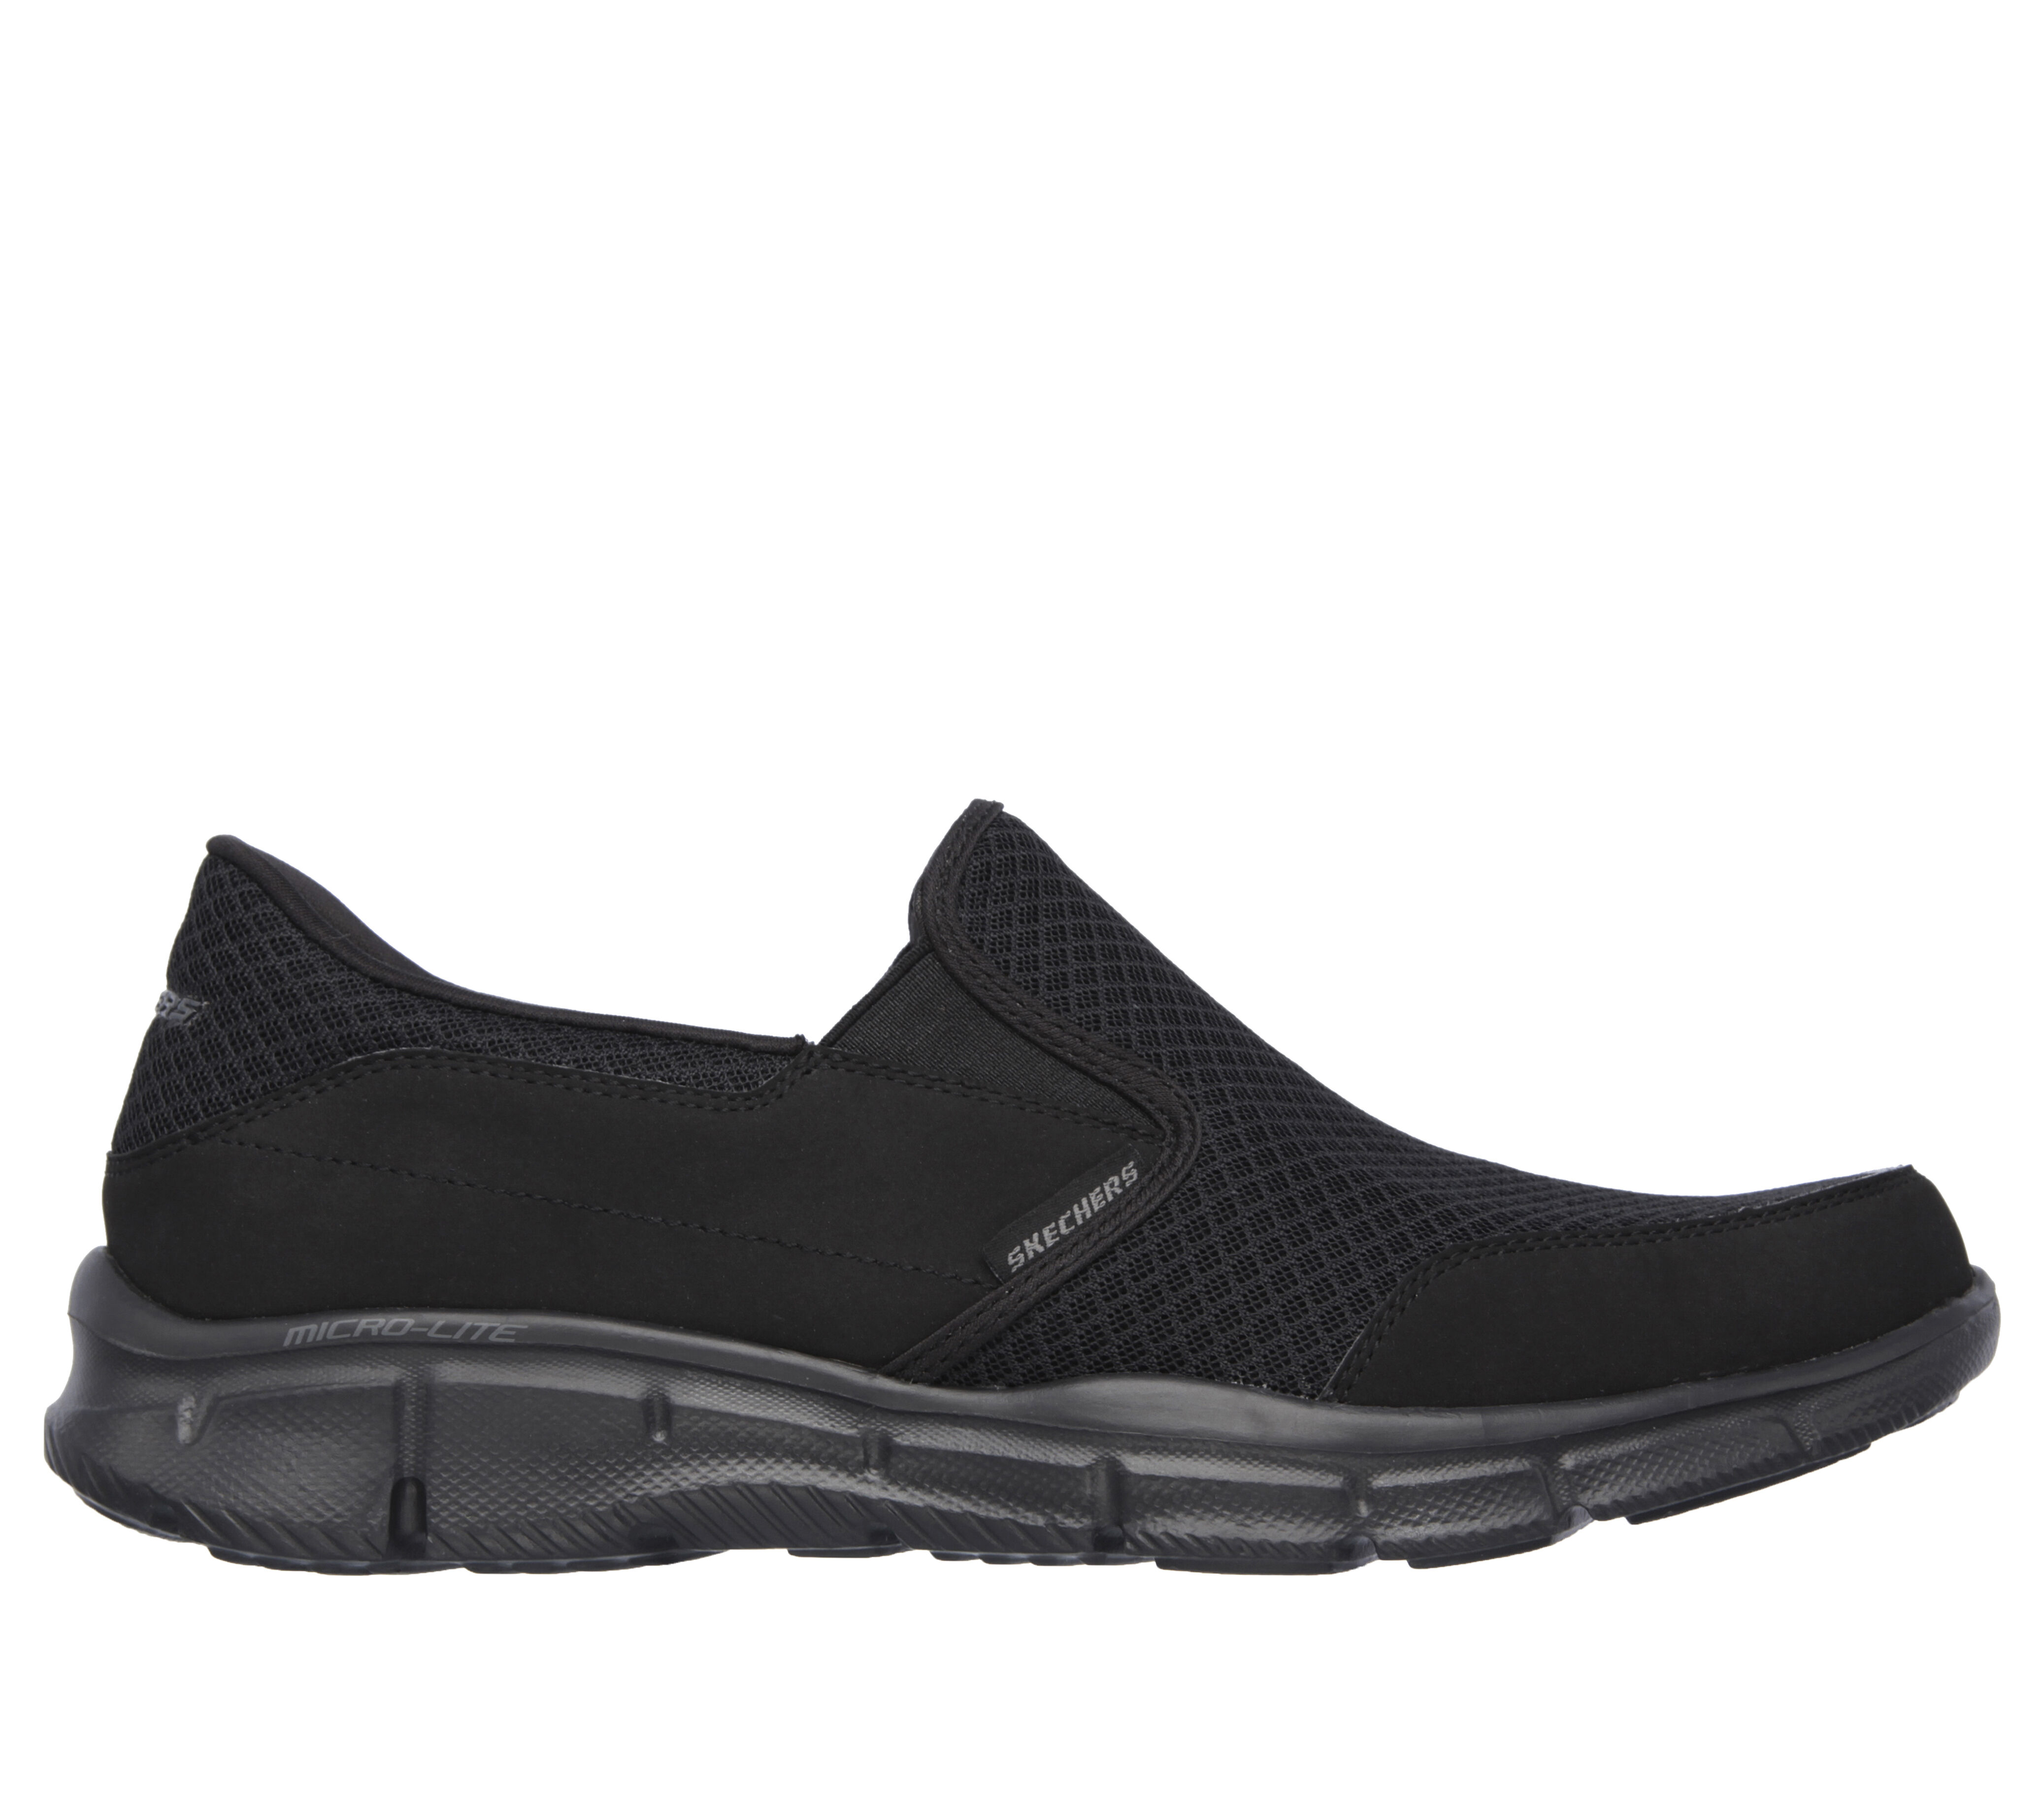 skechers slip on casual shoes